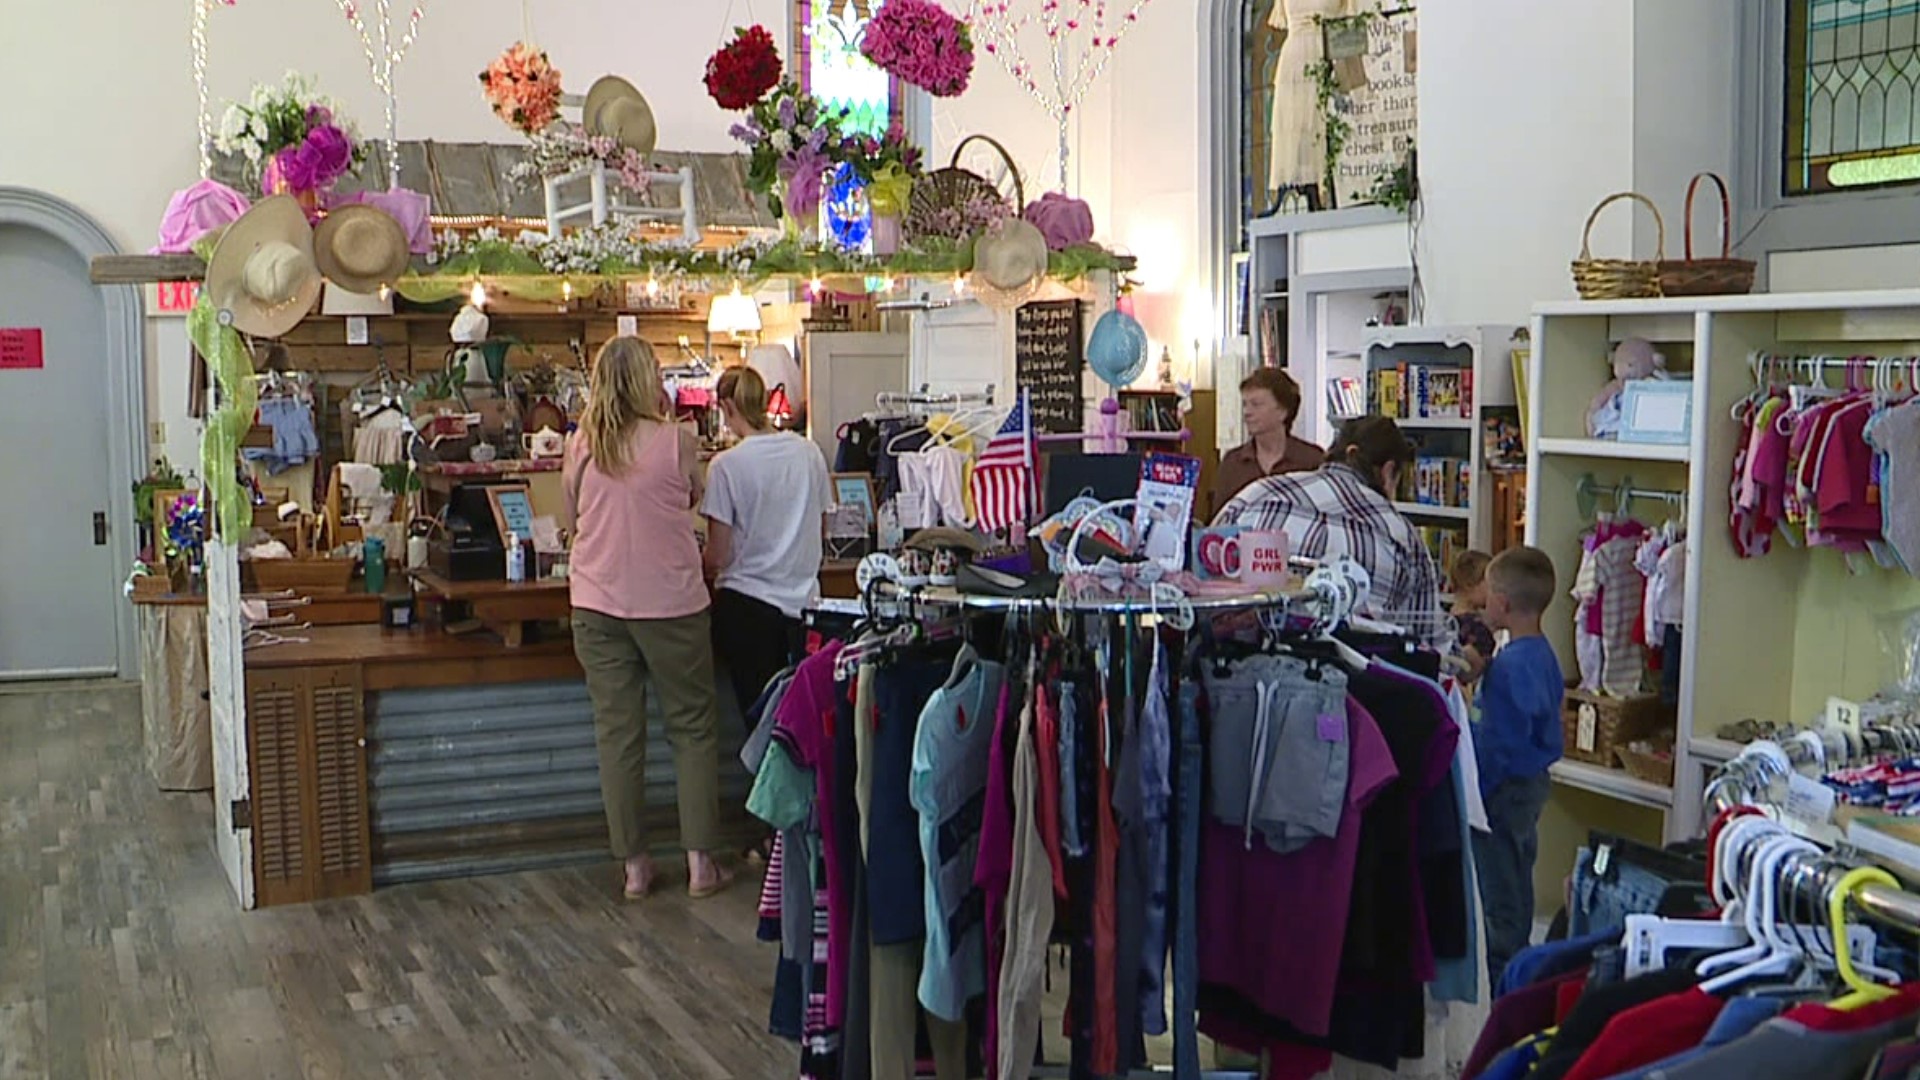 Susquehanna to open a new thrift store supporting local community